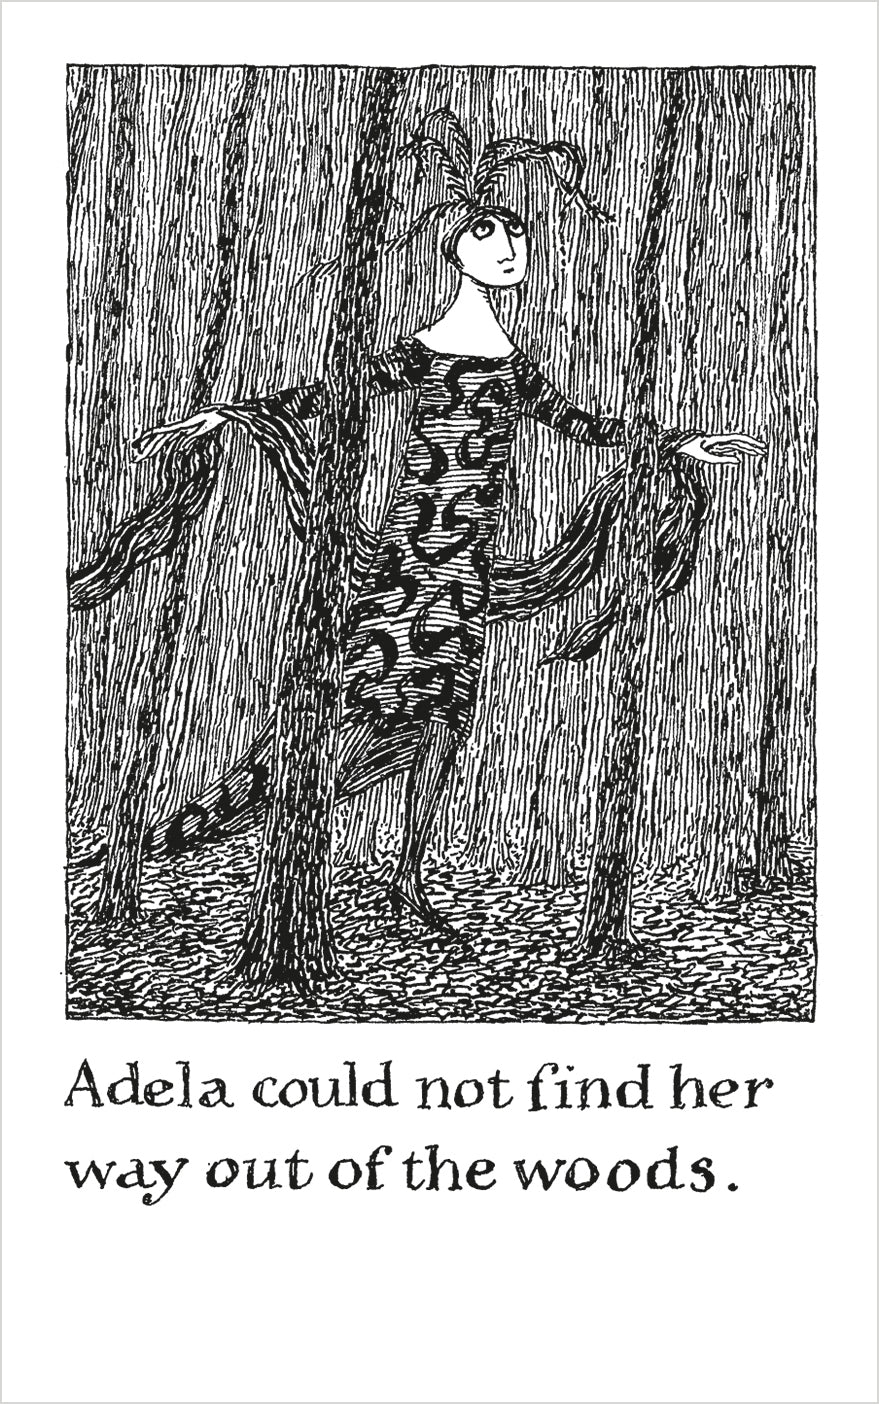 The Helpless Doorknob: A Shuffled Story by Edward Gorey_Interior_2